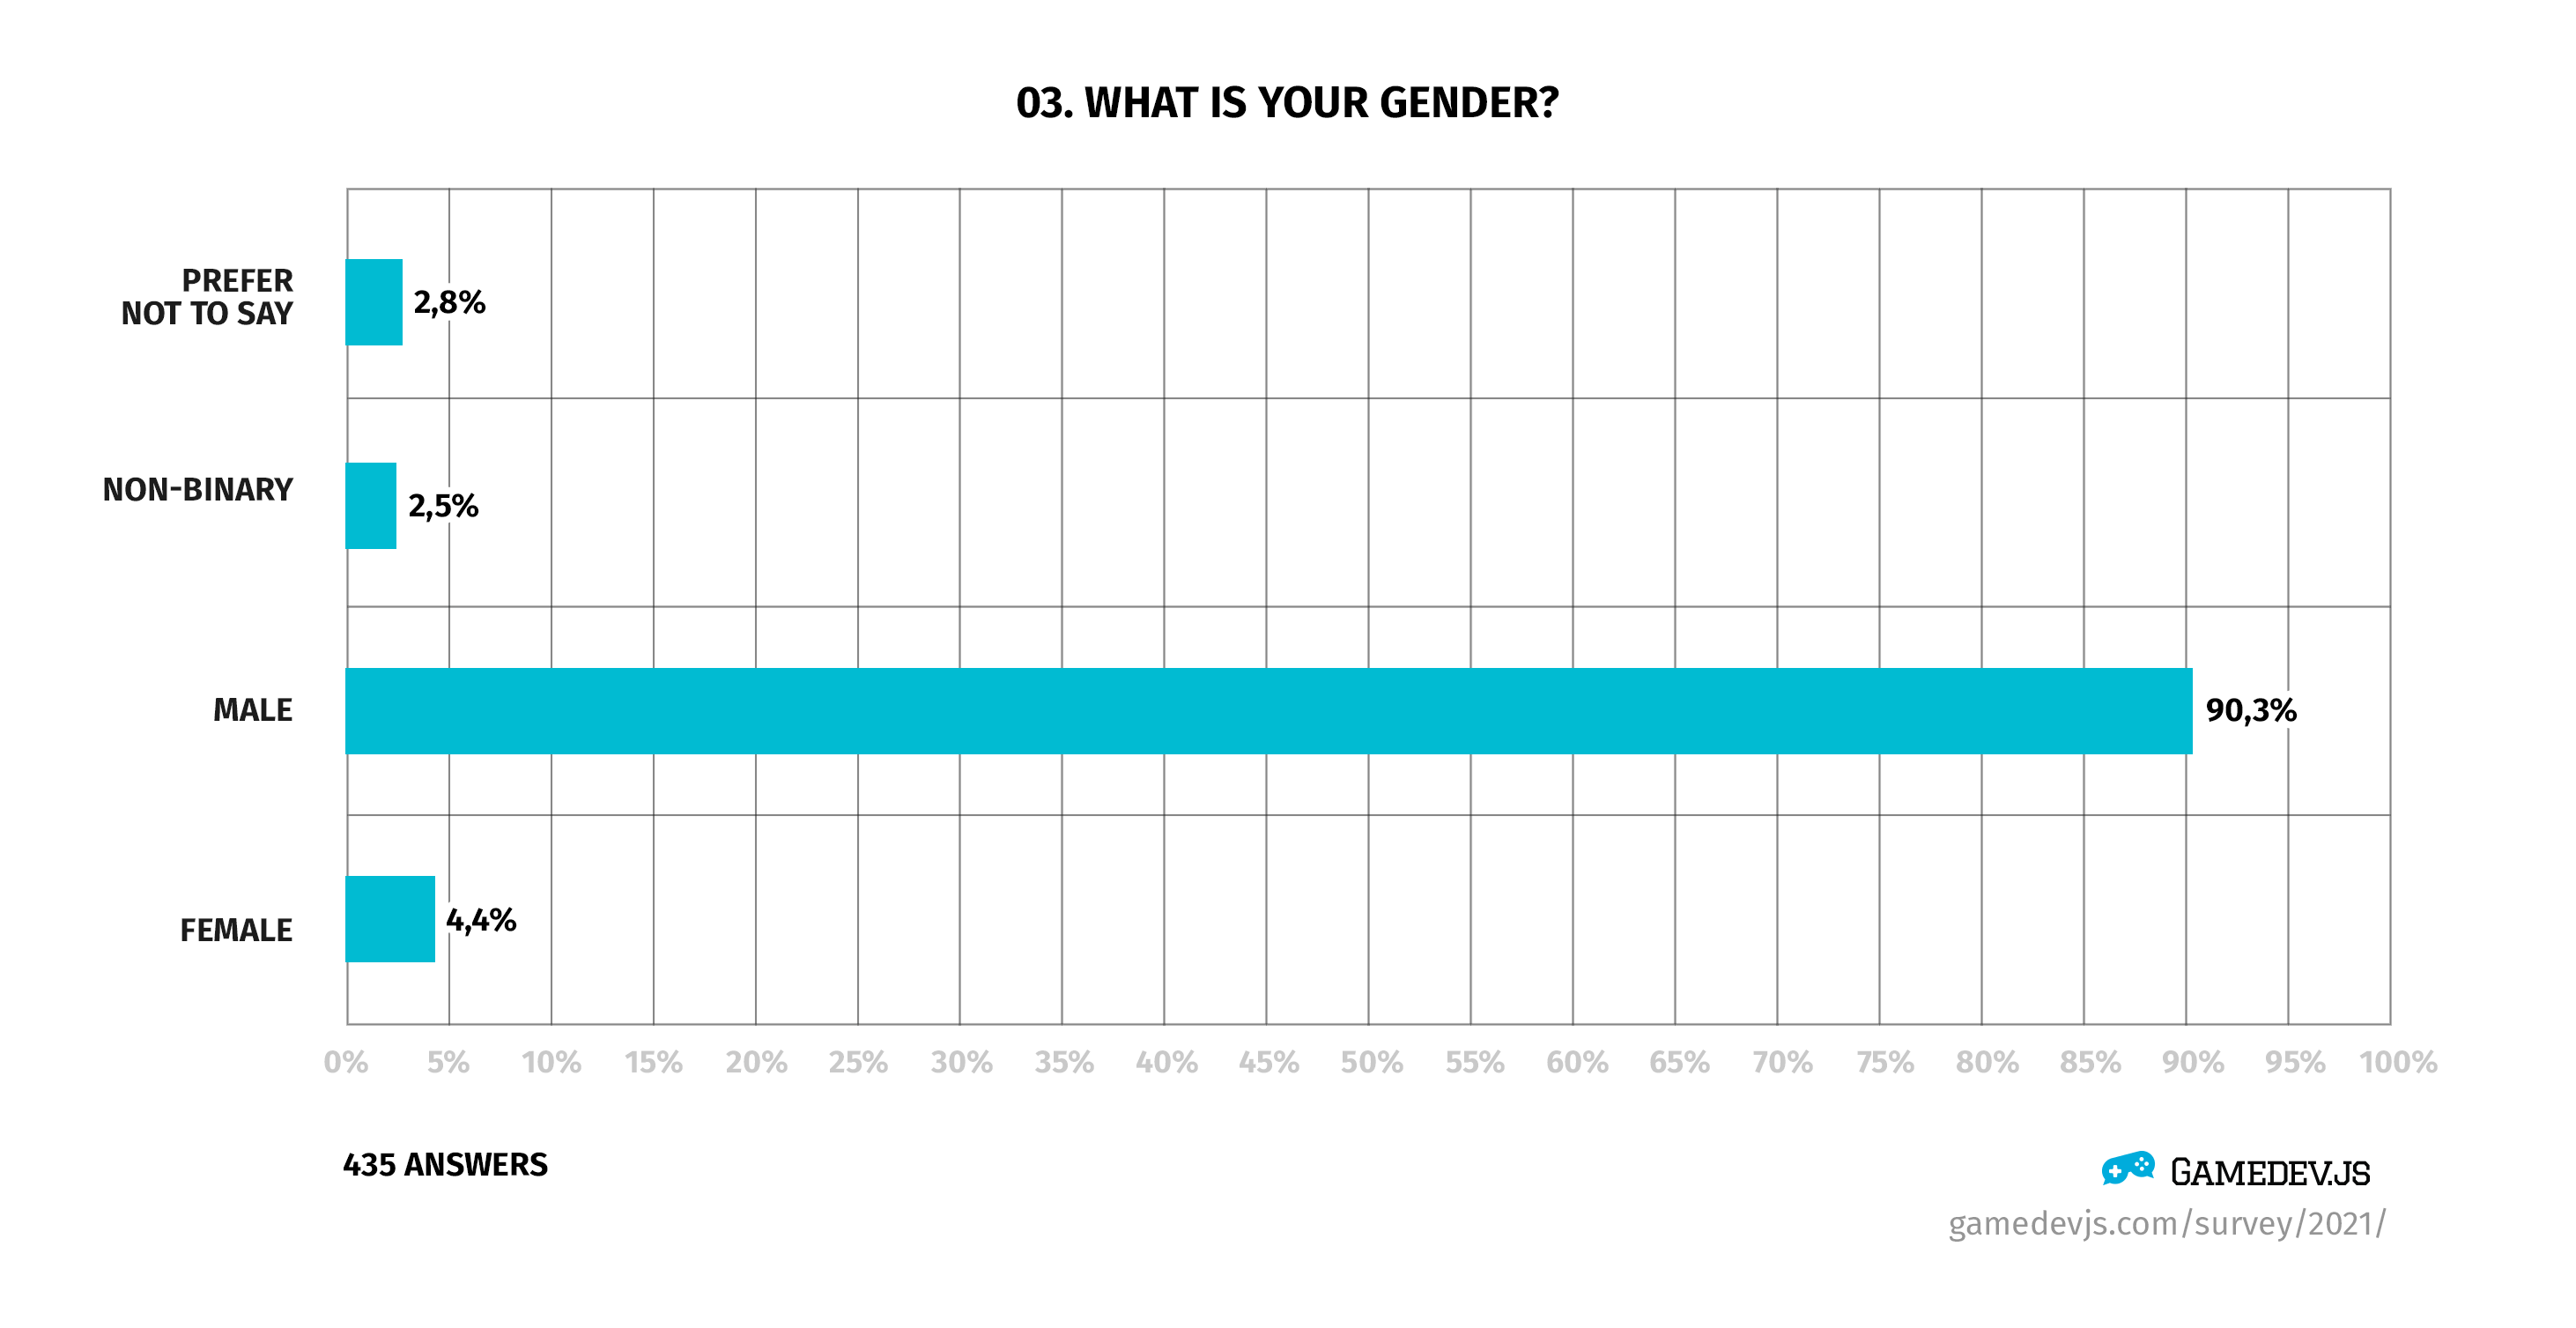 Gamedev.js Survey 2021 - Question #3: What is your gender?